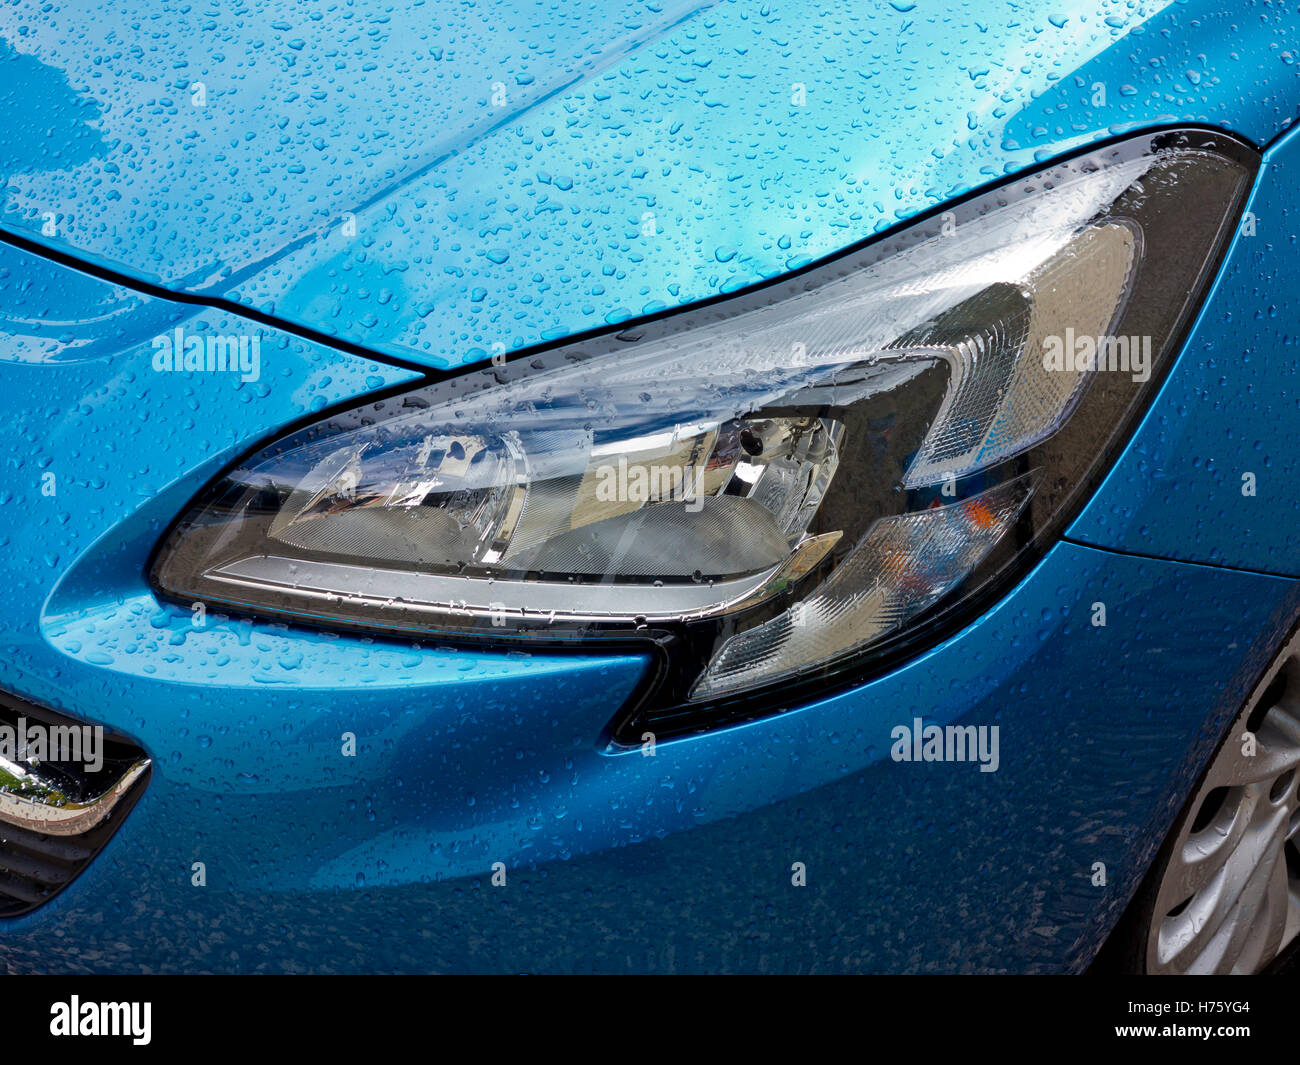 Close up view of metallic blue 2016 model Vauxhall Corsa car with water  drops on body and headlights Stock Photo - Alamy